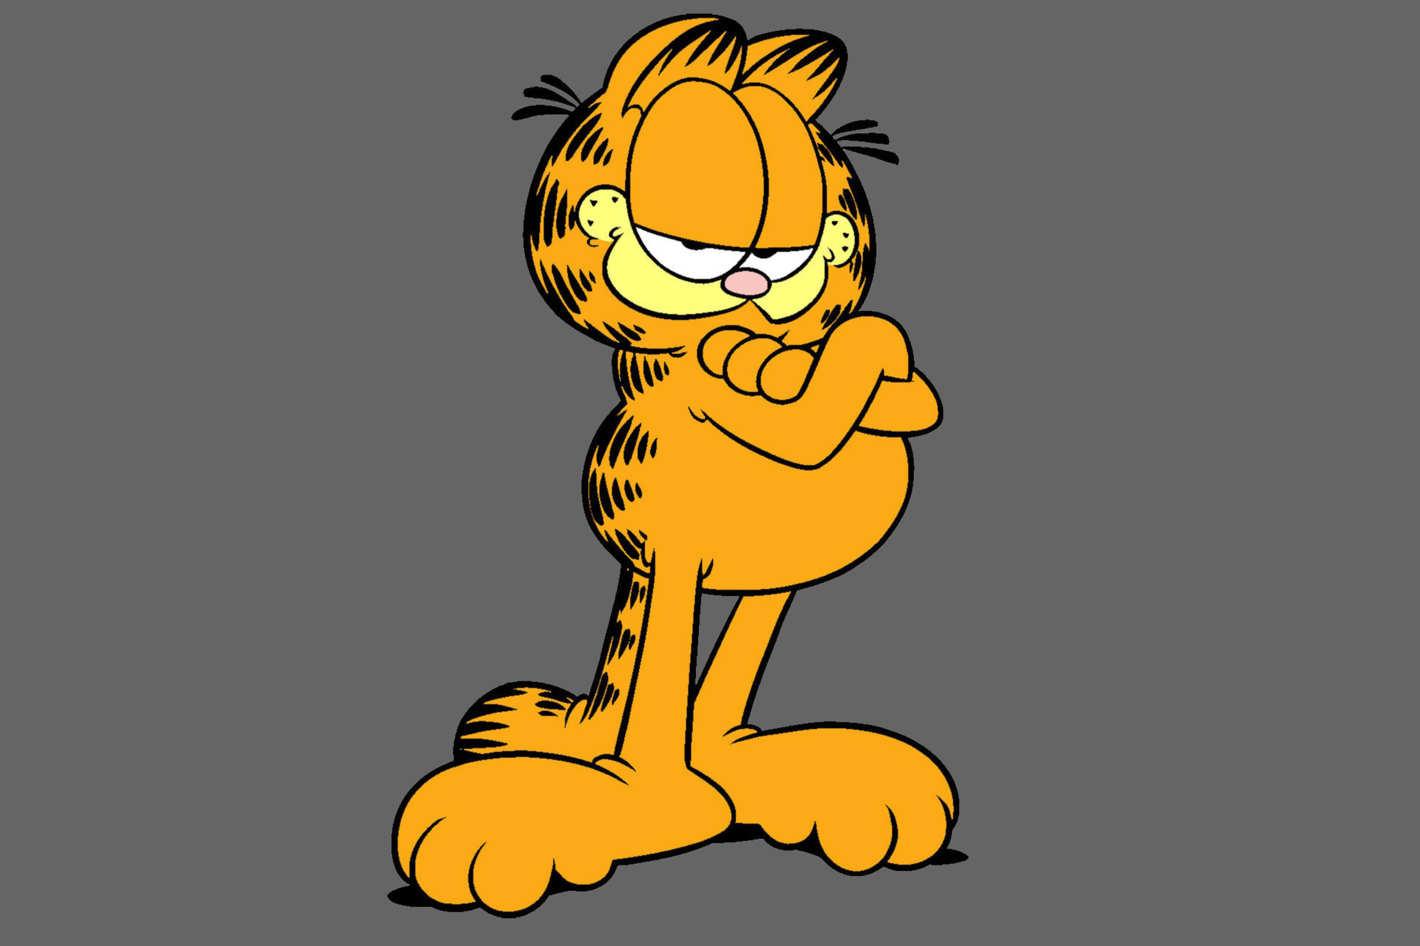 Garfield has become one of the world's most recognisable brands